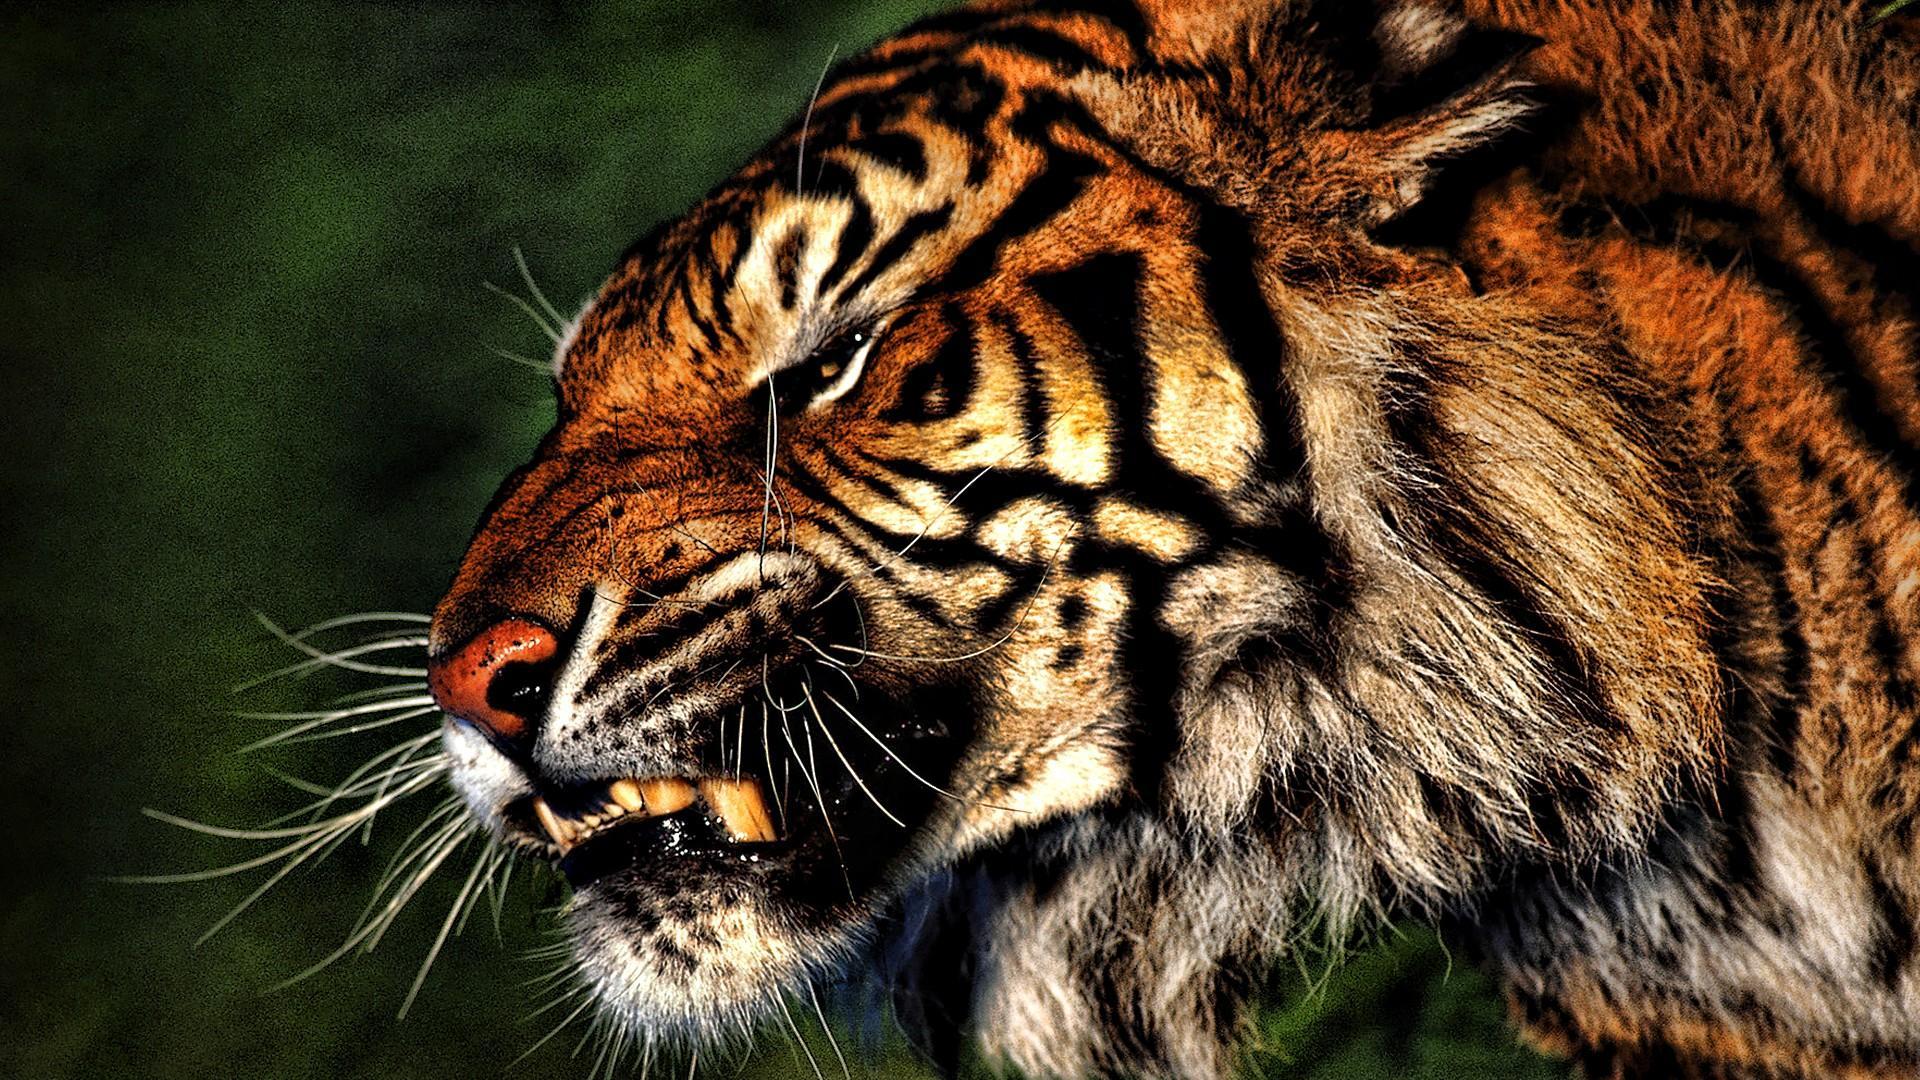 Cool Tiger Wallpaper , Find HD Wallpaper For Free